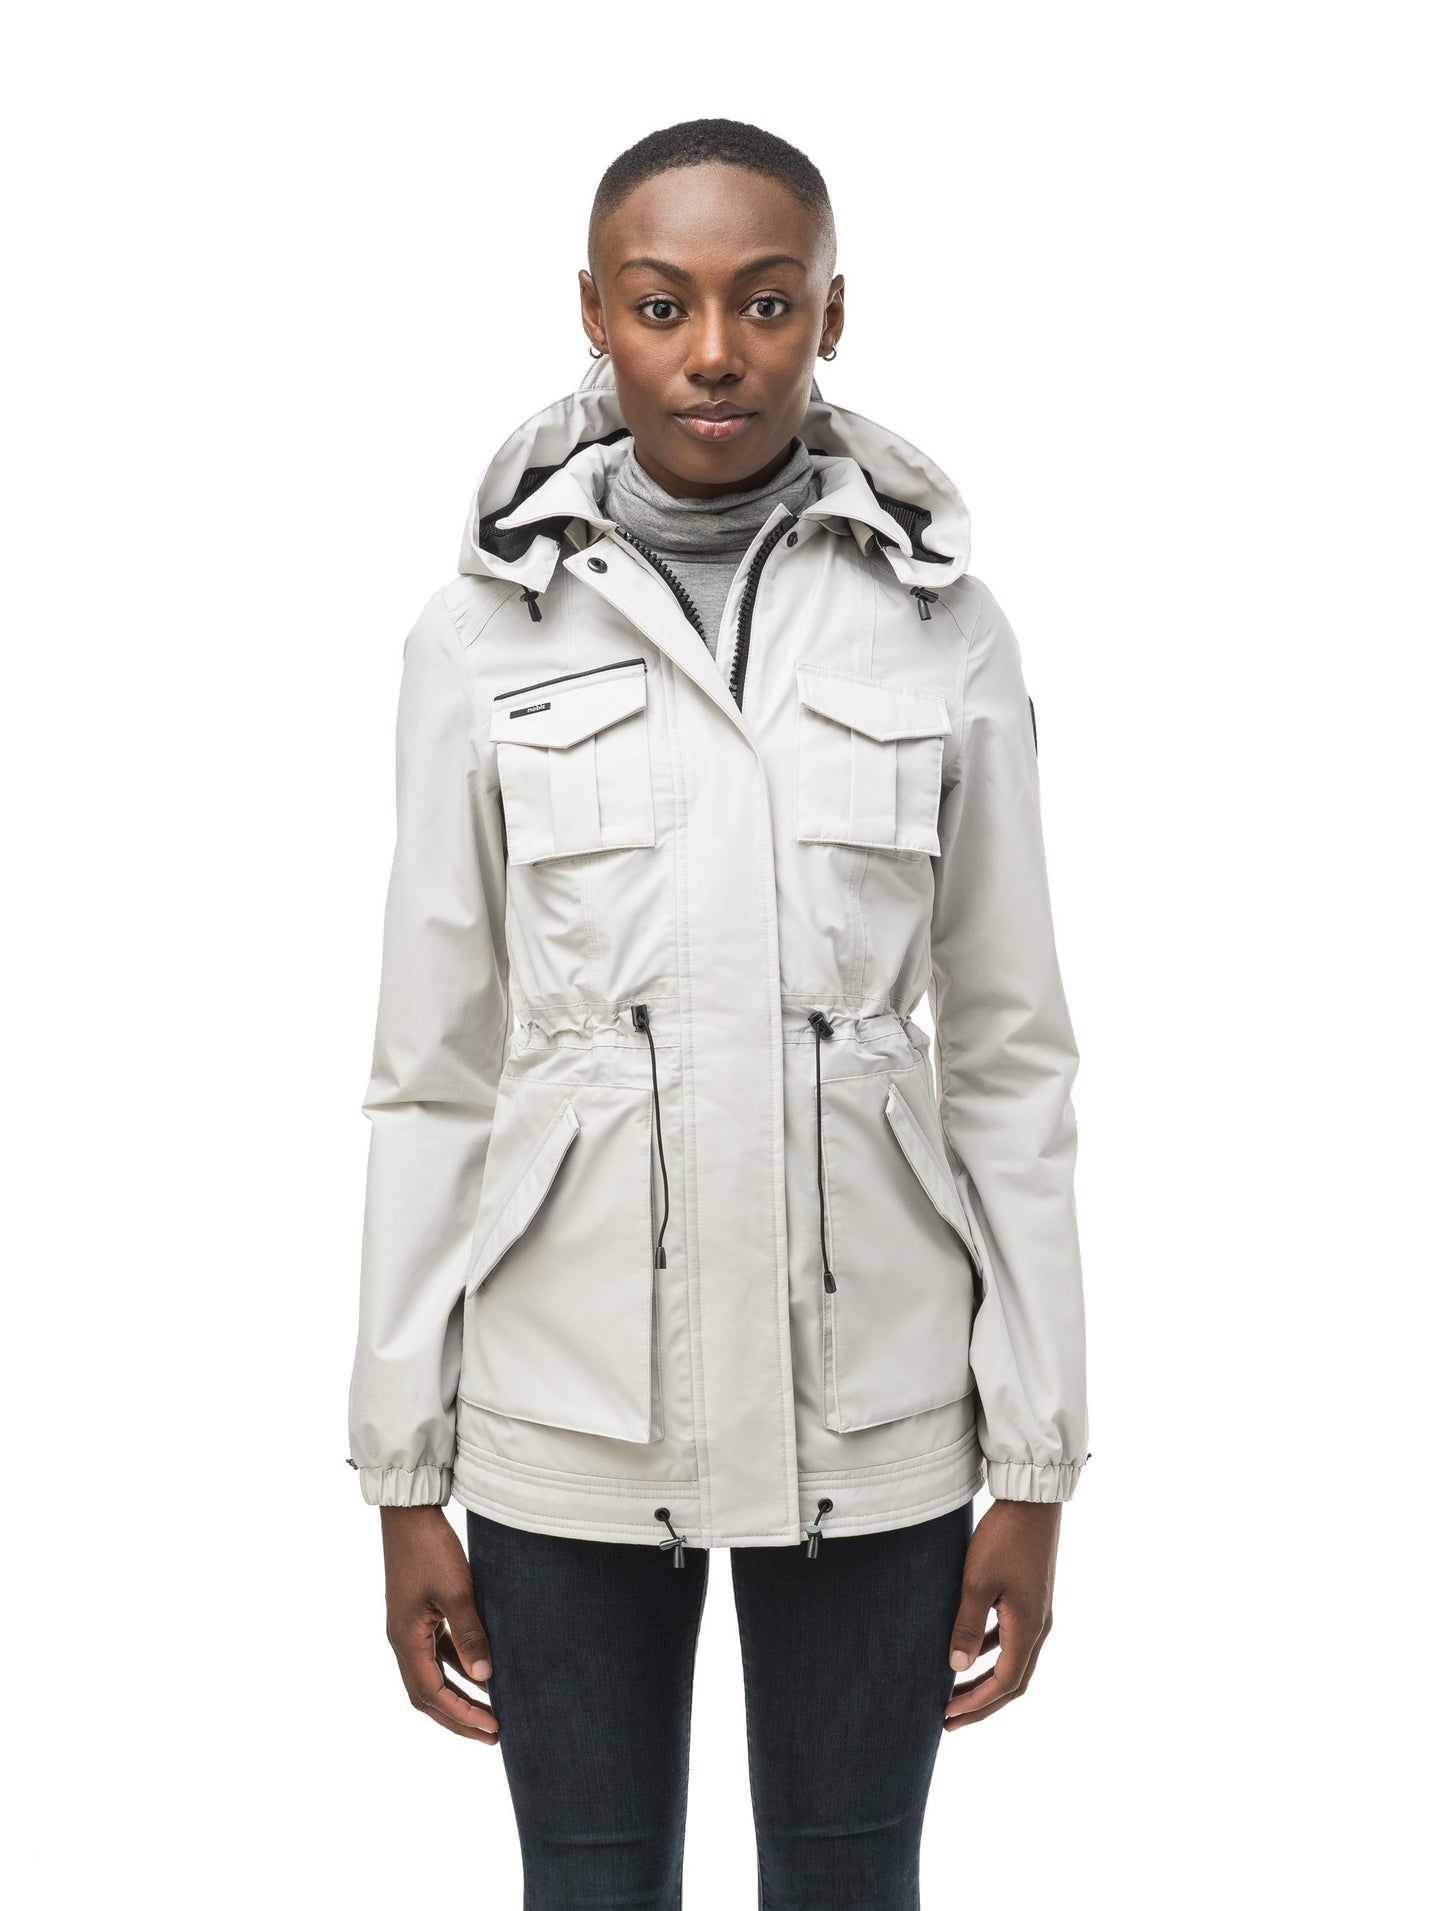 Women's hooded shirt jacket with four front pockets and adjustable waist in Lt Grey